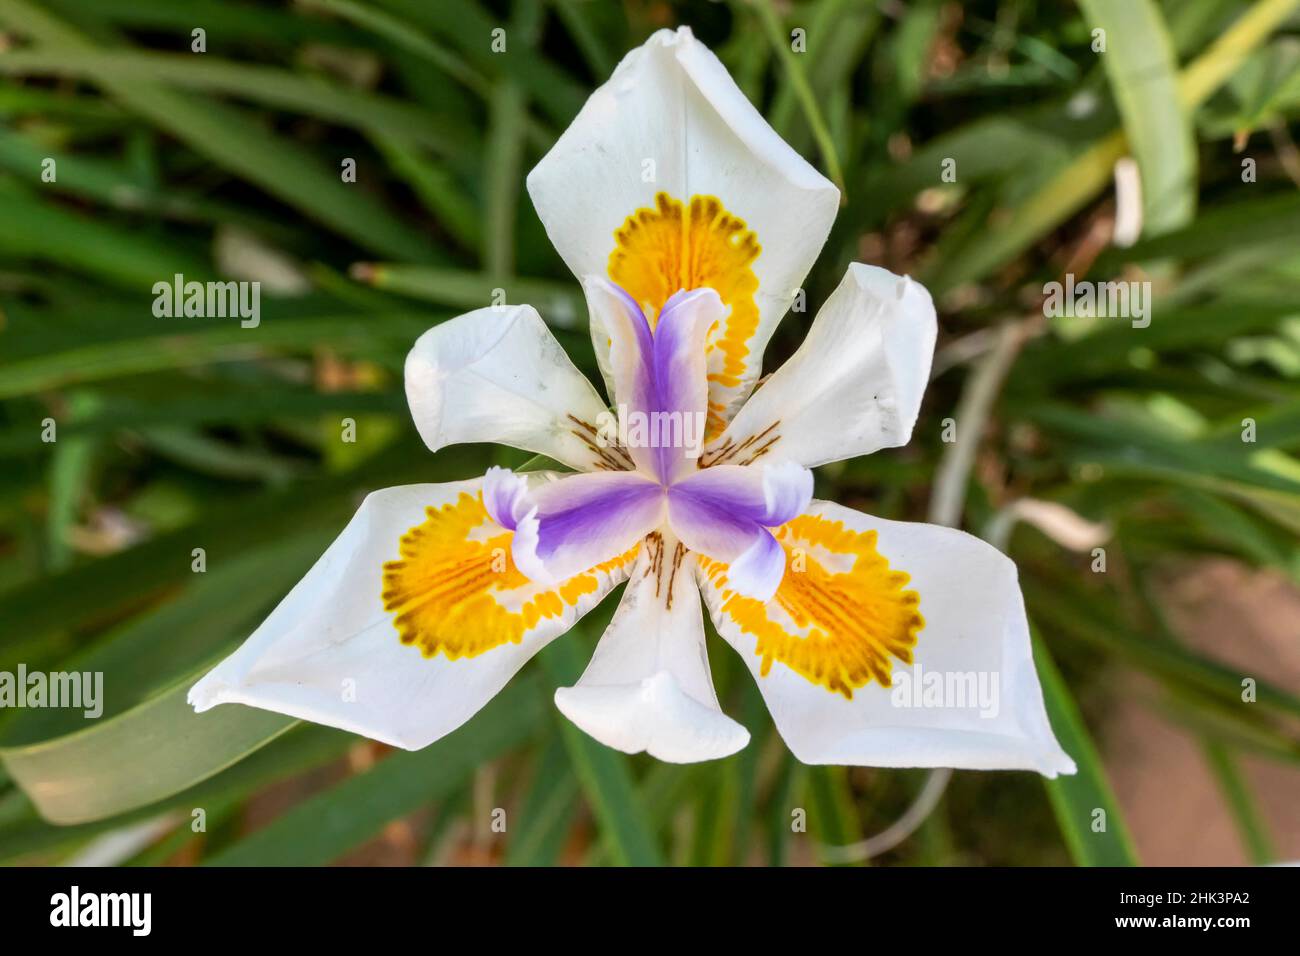 Japanese wild iris to be determined, detail of a flower in summer, public garden of the Villa Noailles in Hyeres, Var, France Stock Photo